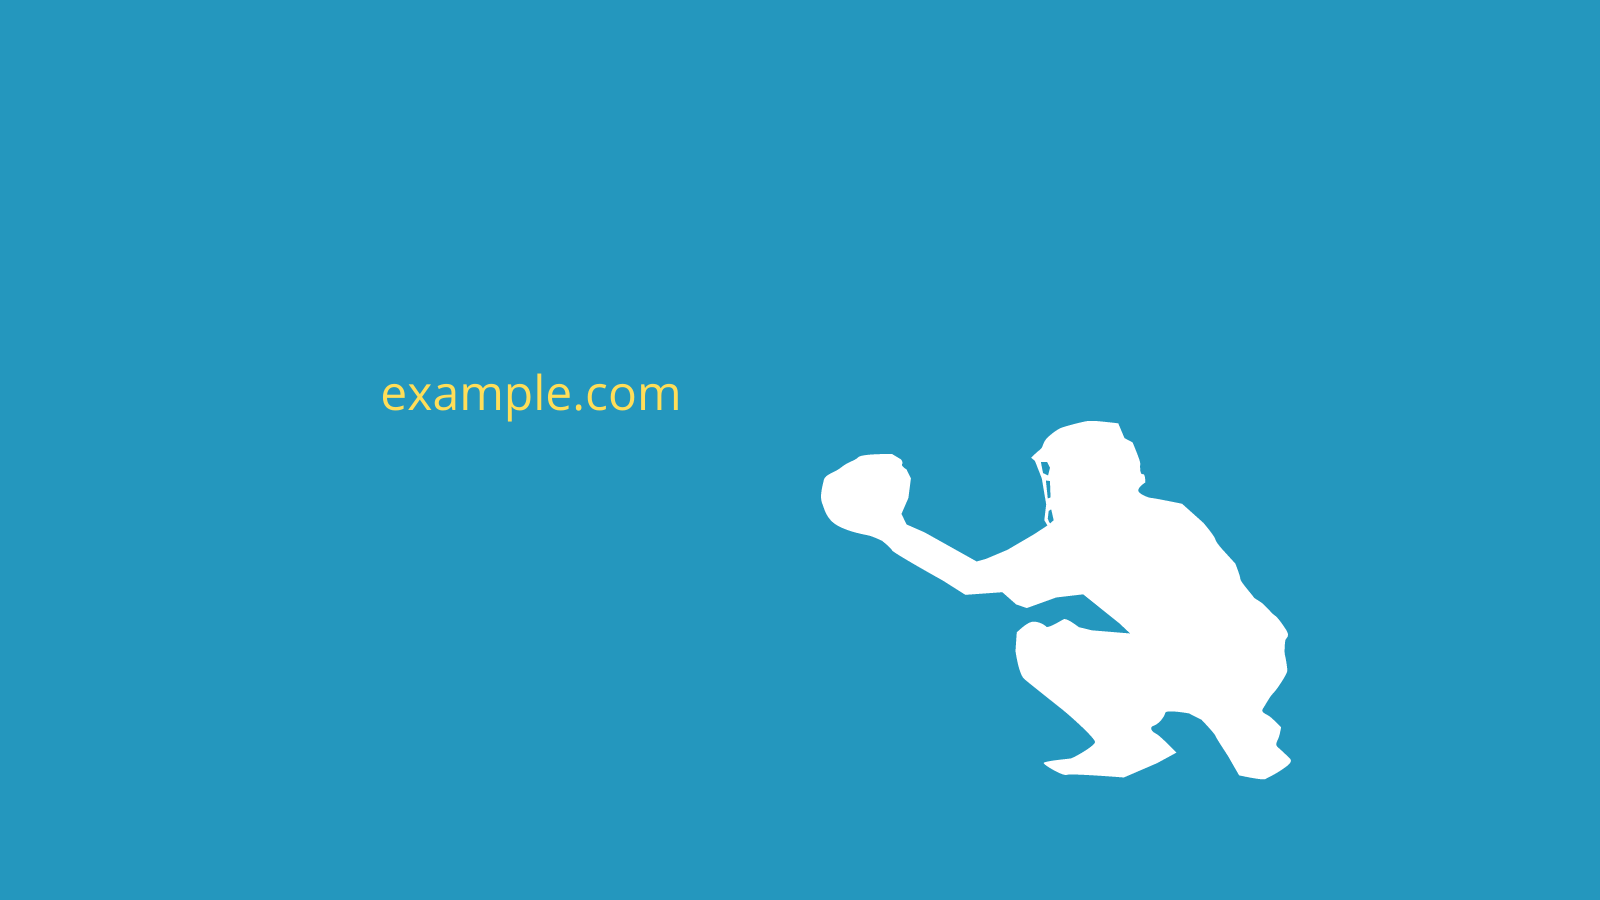 A silhouette of a catcher catching "example.com"